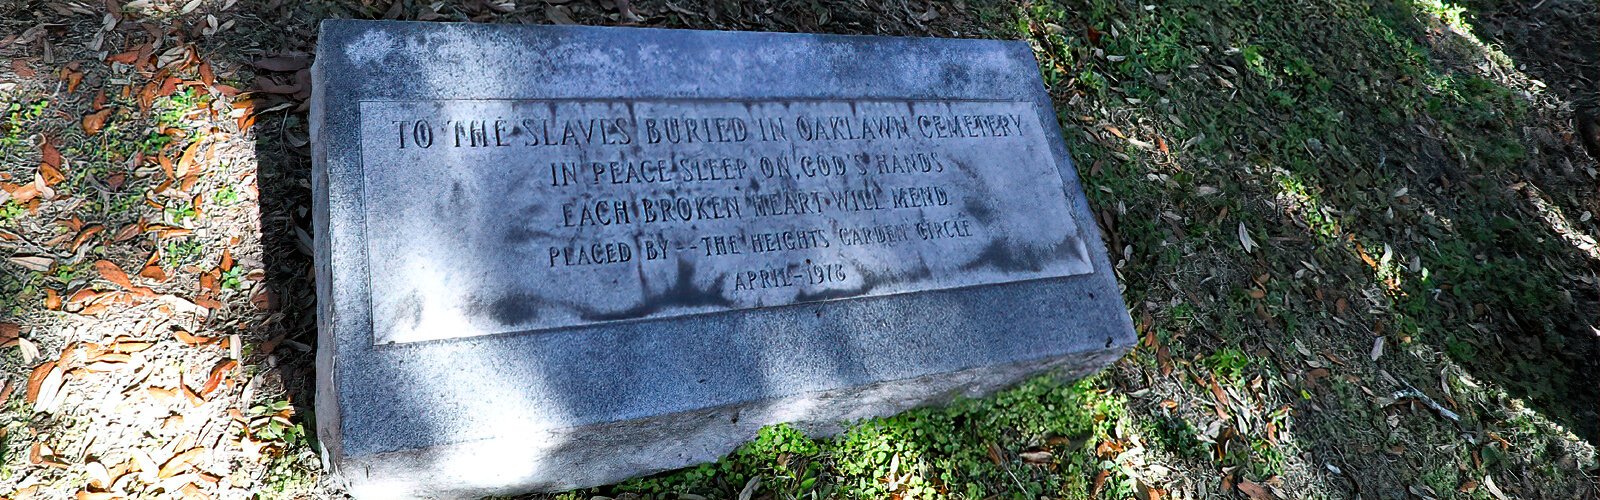 In 1978, the Heights Garden Circle placed a granite marker over the Black burial section as a tribute that reads "To the slaves buried in Oaklawn Cemetery. In peace sleep on God's hands. Each broken heart will mend."